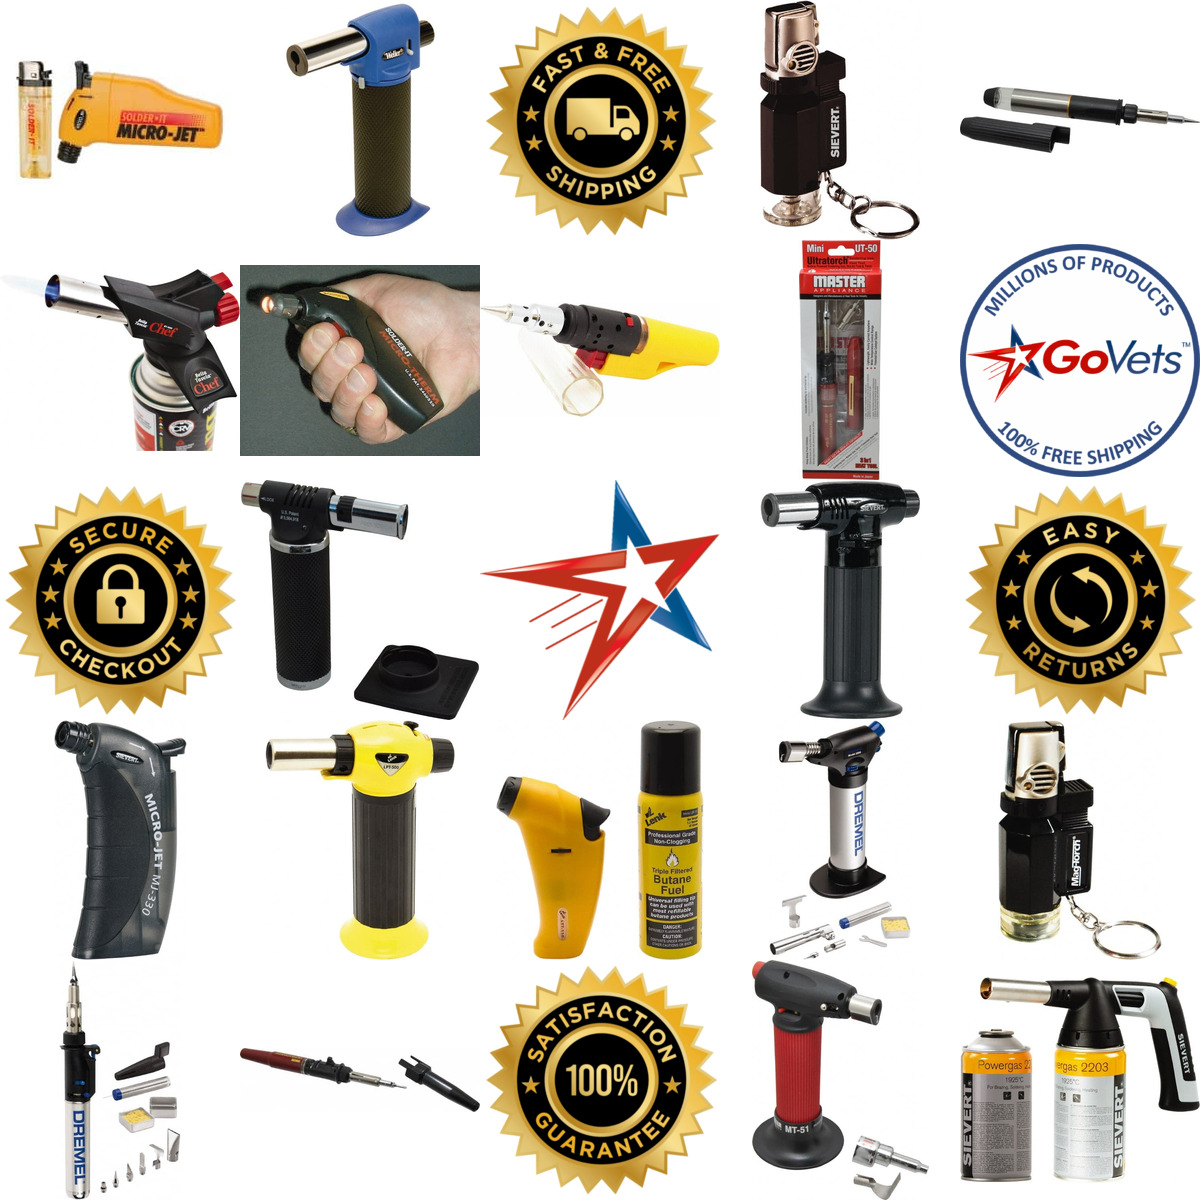 A selection of Butane Torches and Butane Soldering Irons products on GoVets